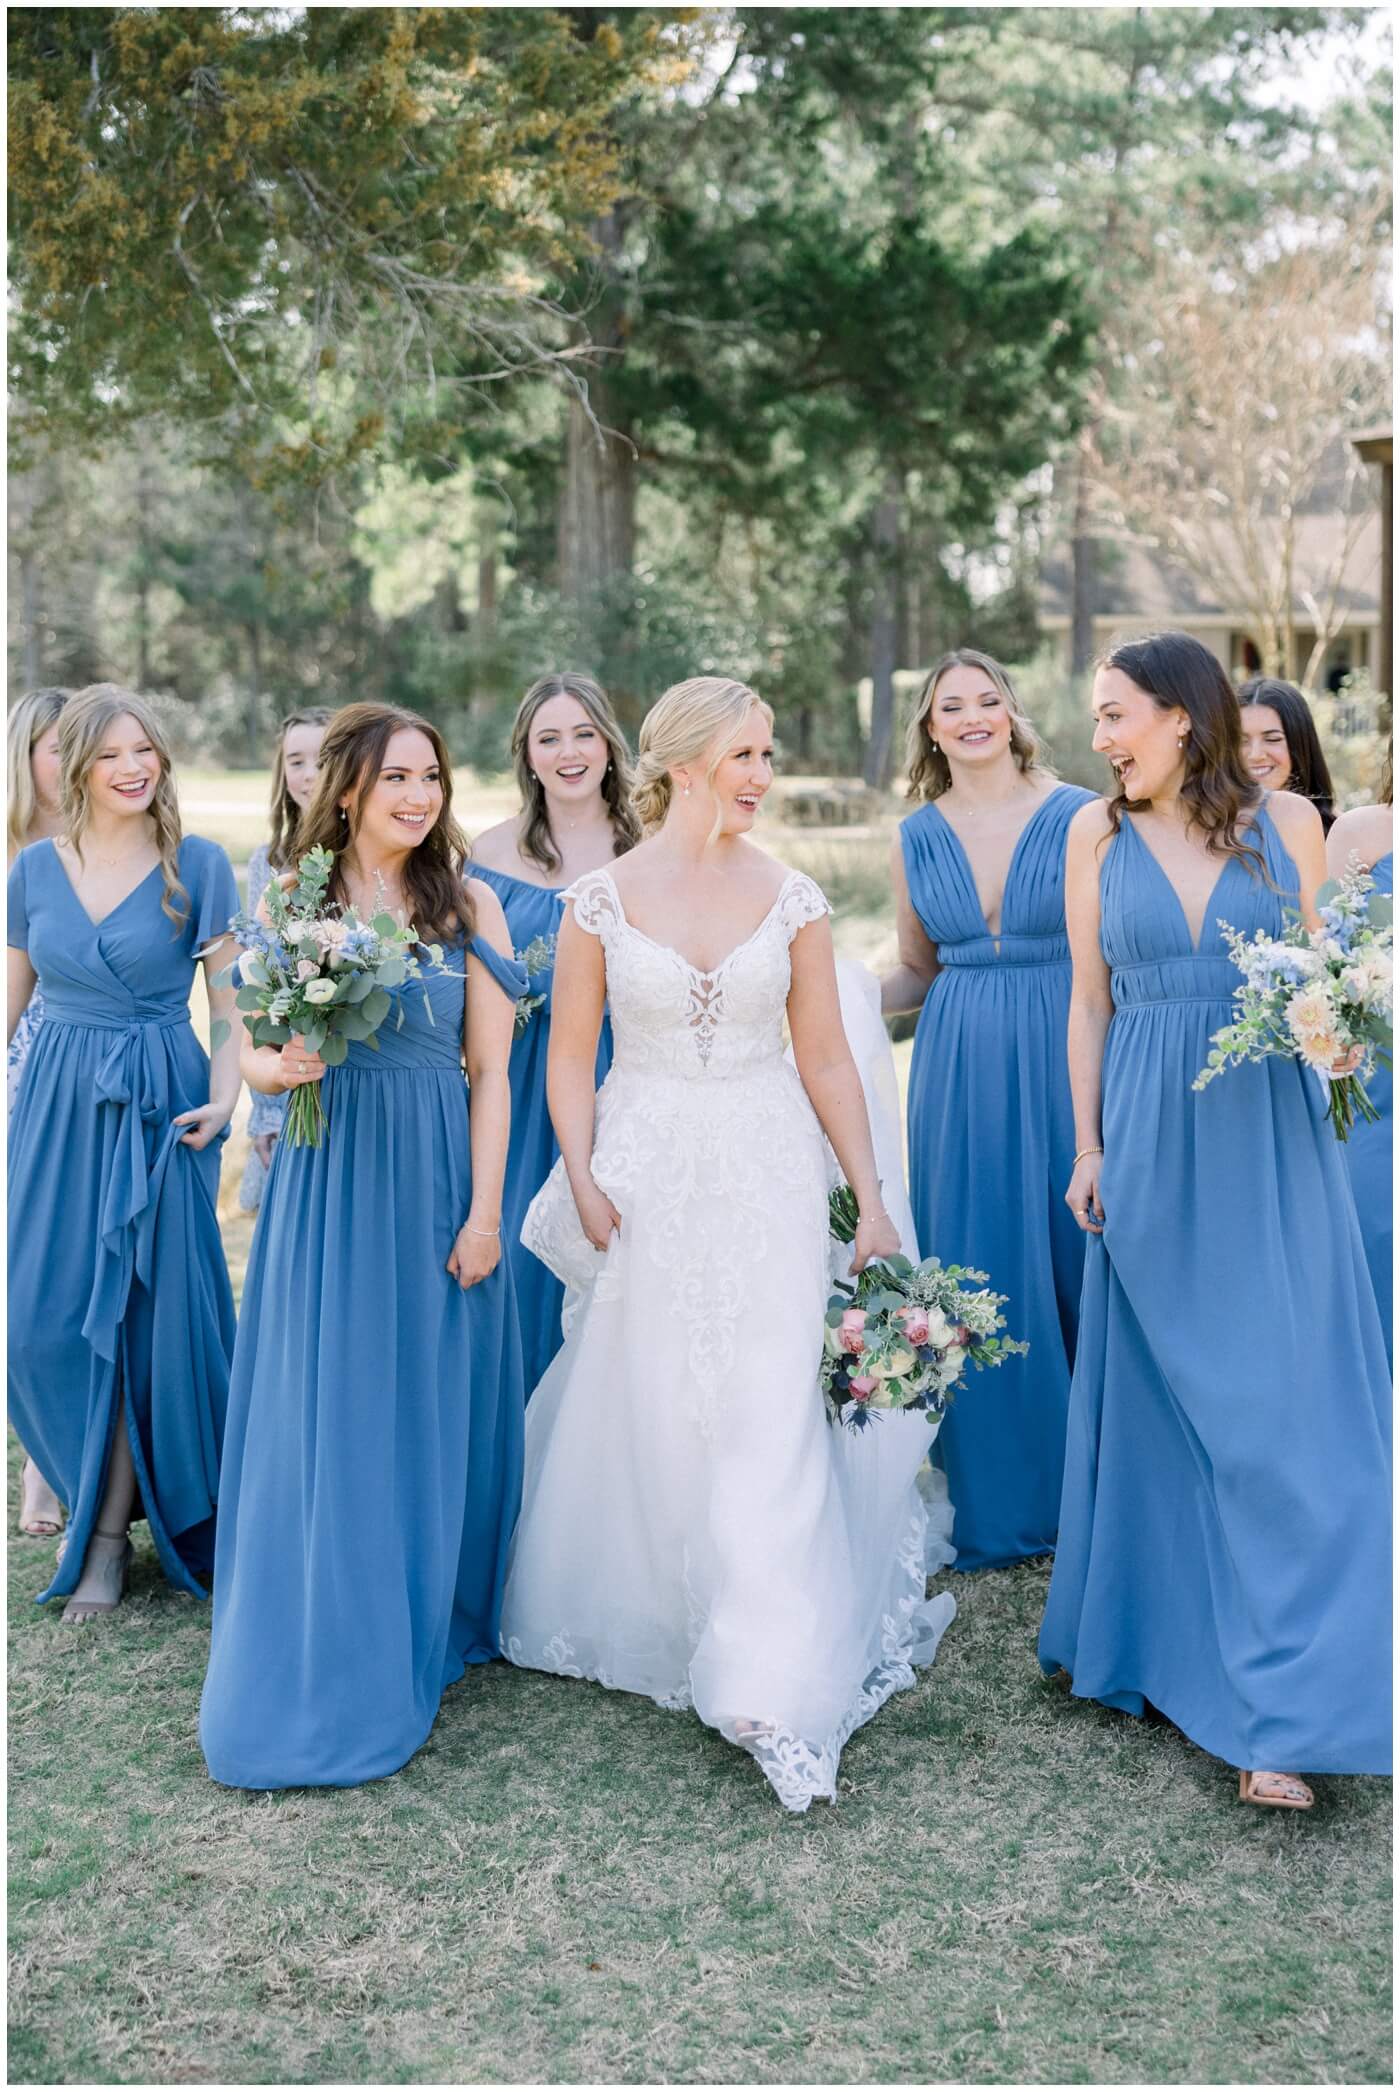 A bride and her bridesmaids at The Vine